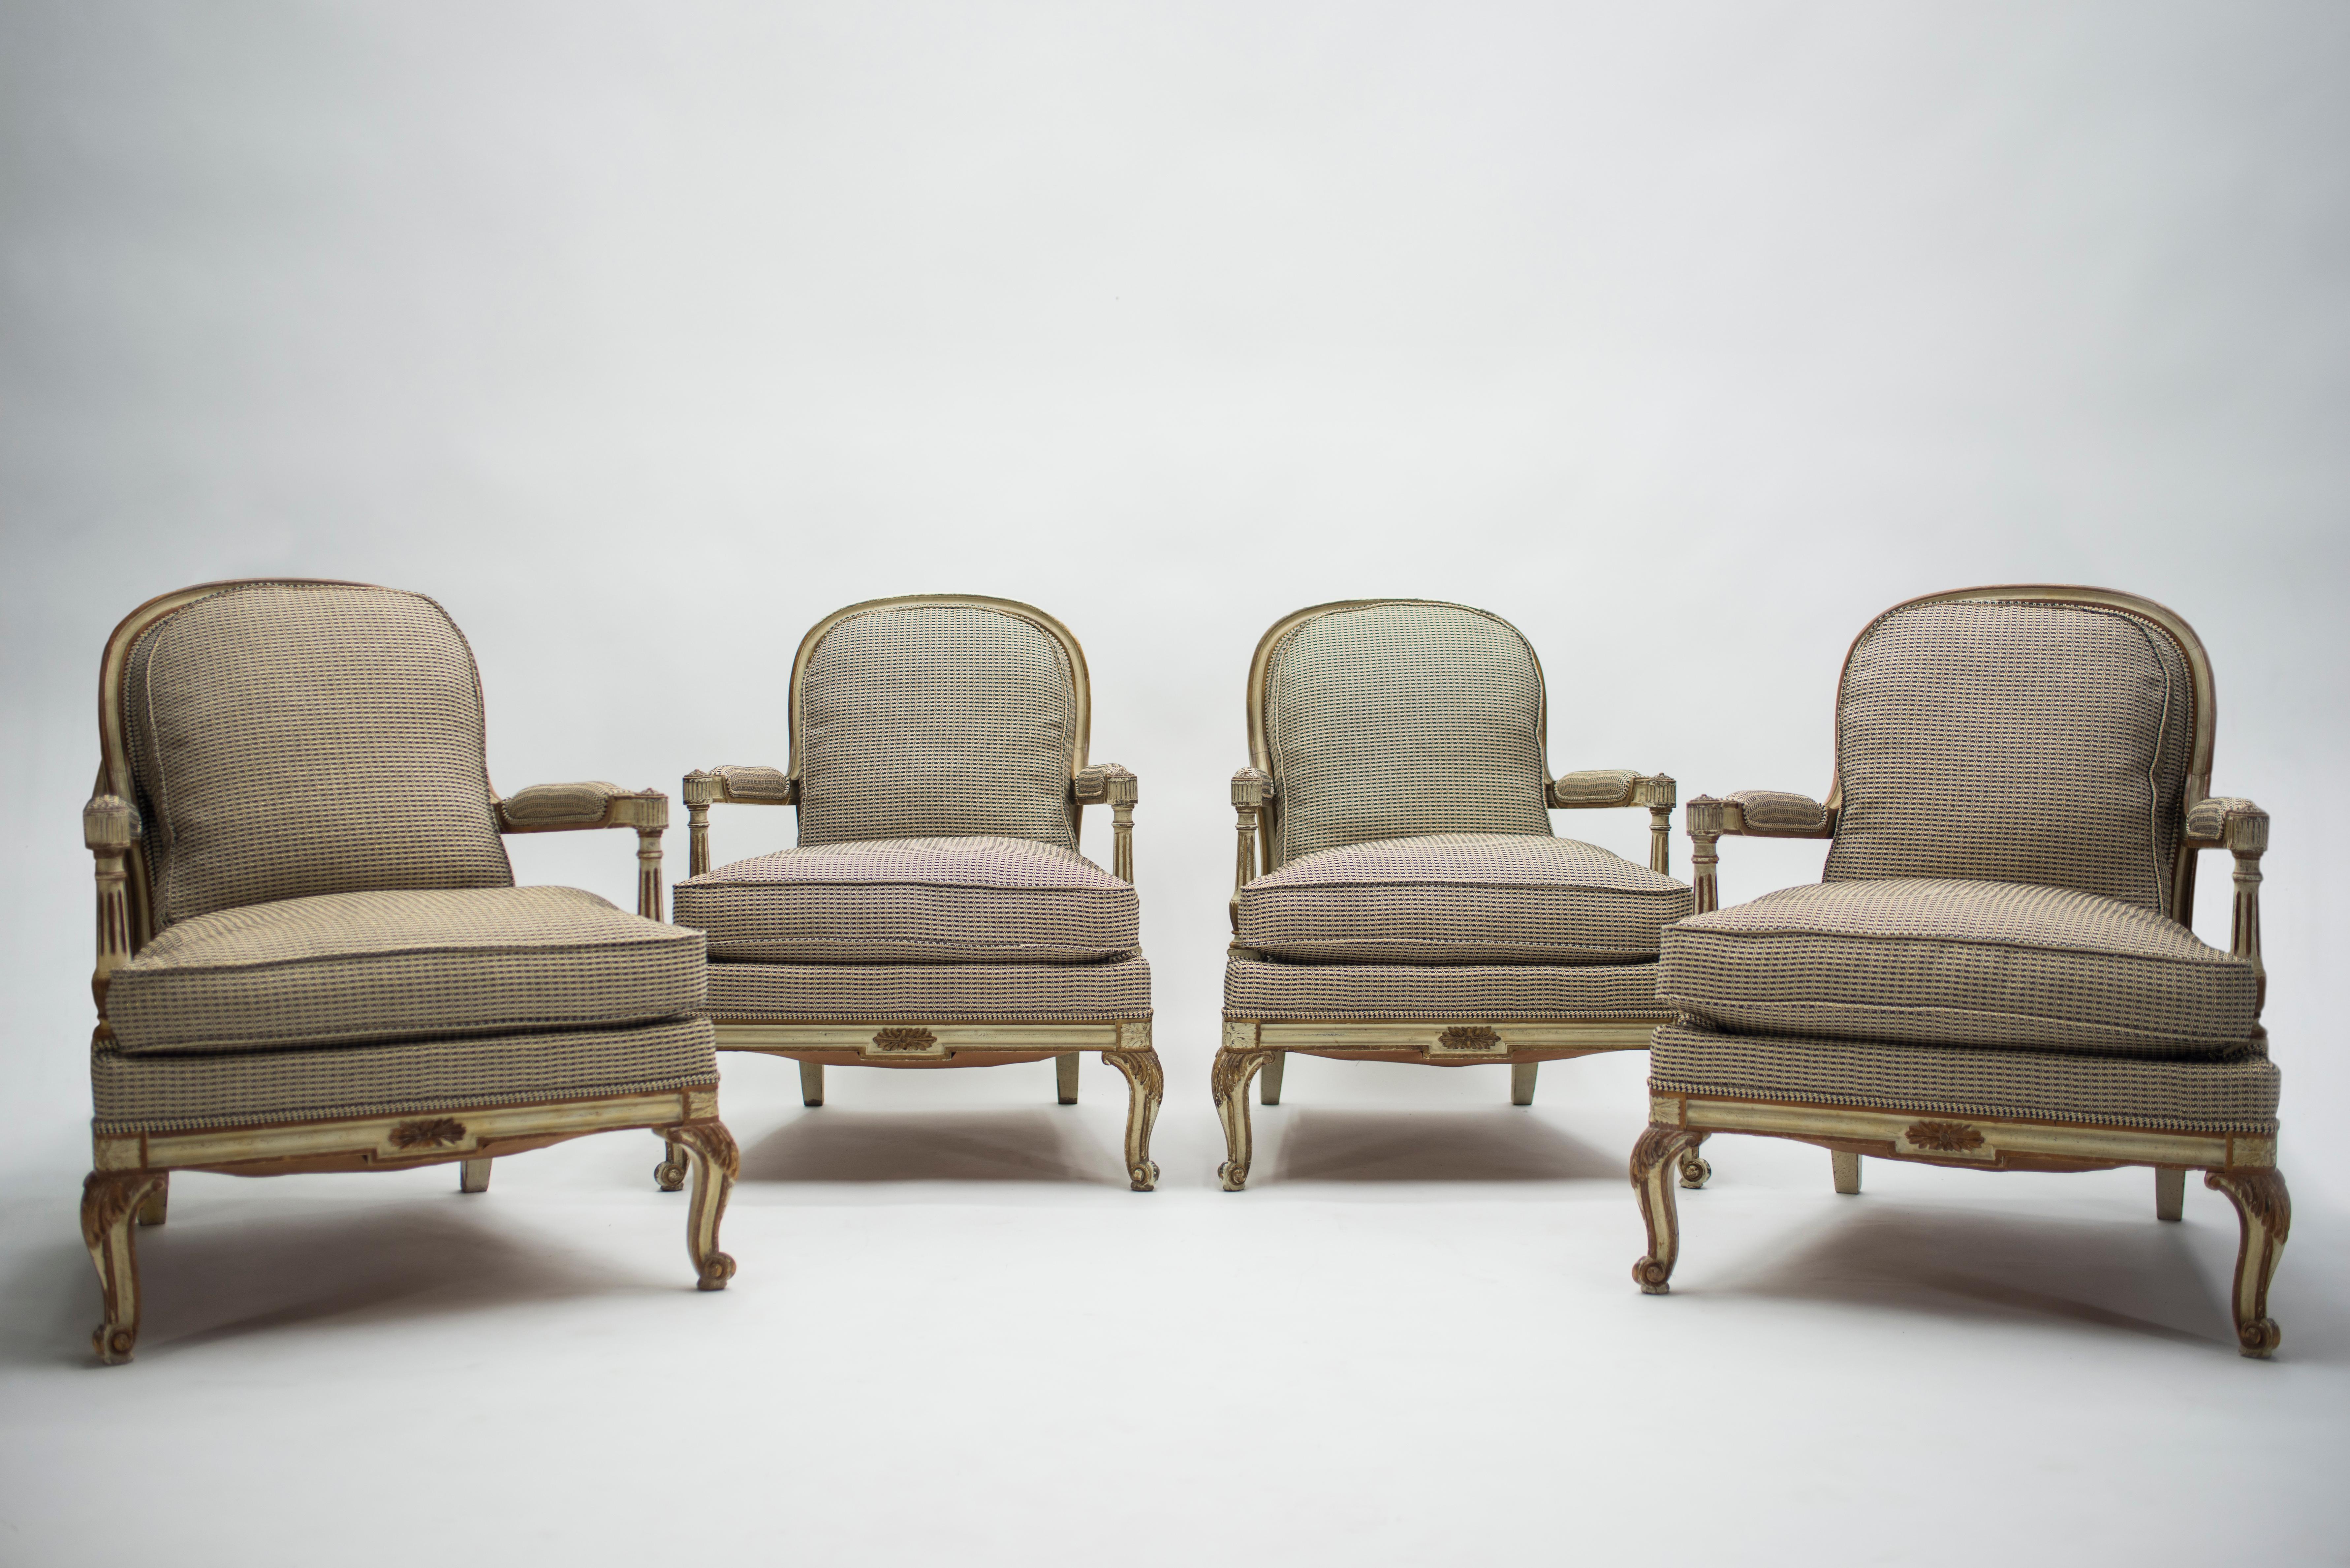 Hand-Painted Rare Neoclassical Set of 4 Armchairs Signed by Maurice Hirsch, 1970s